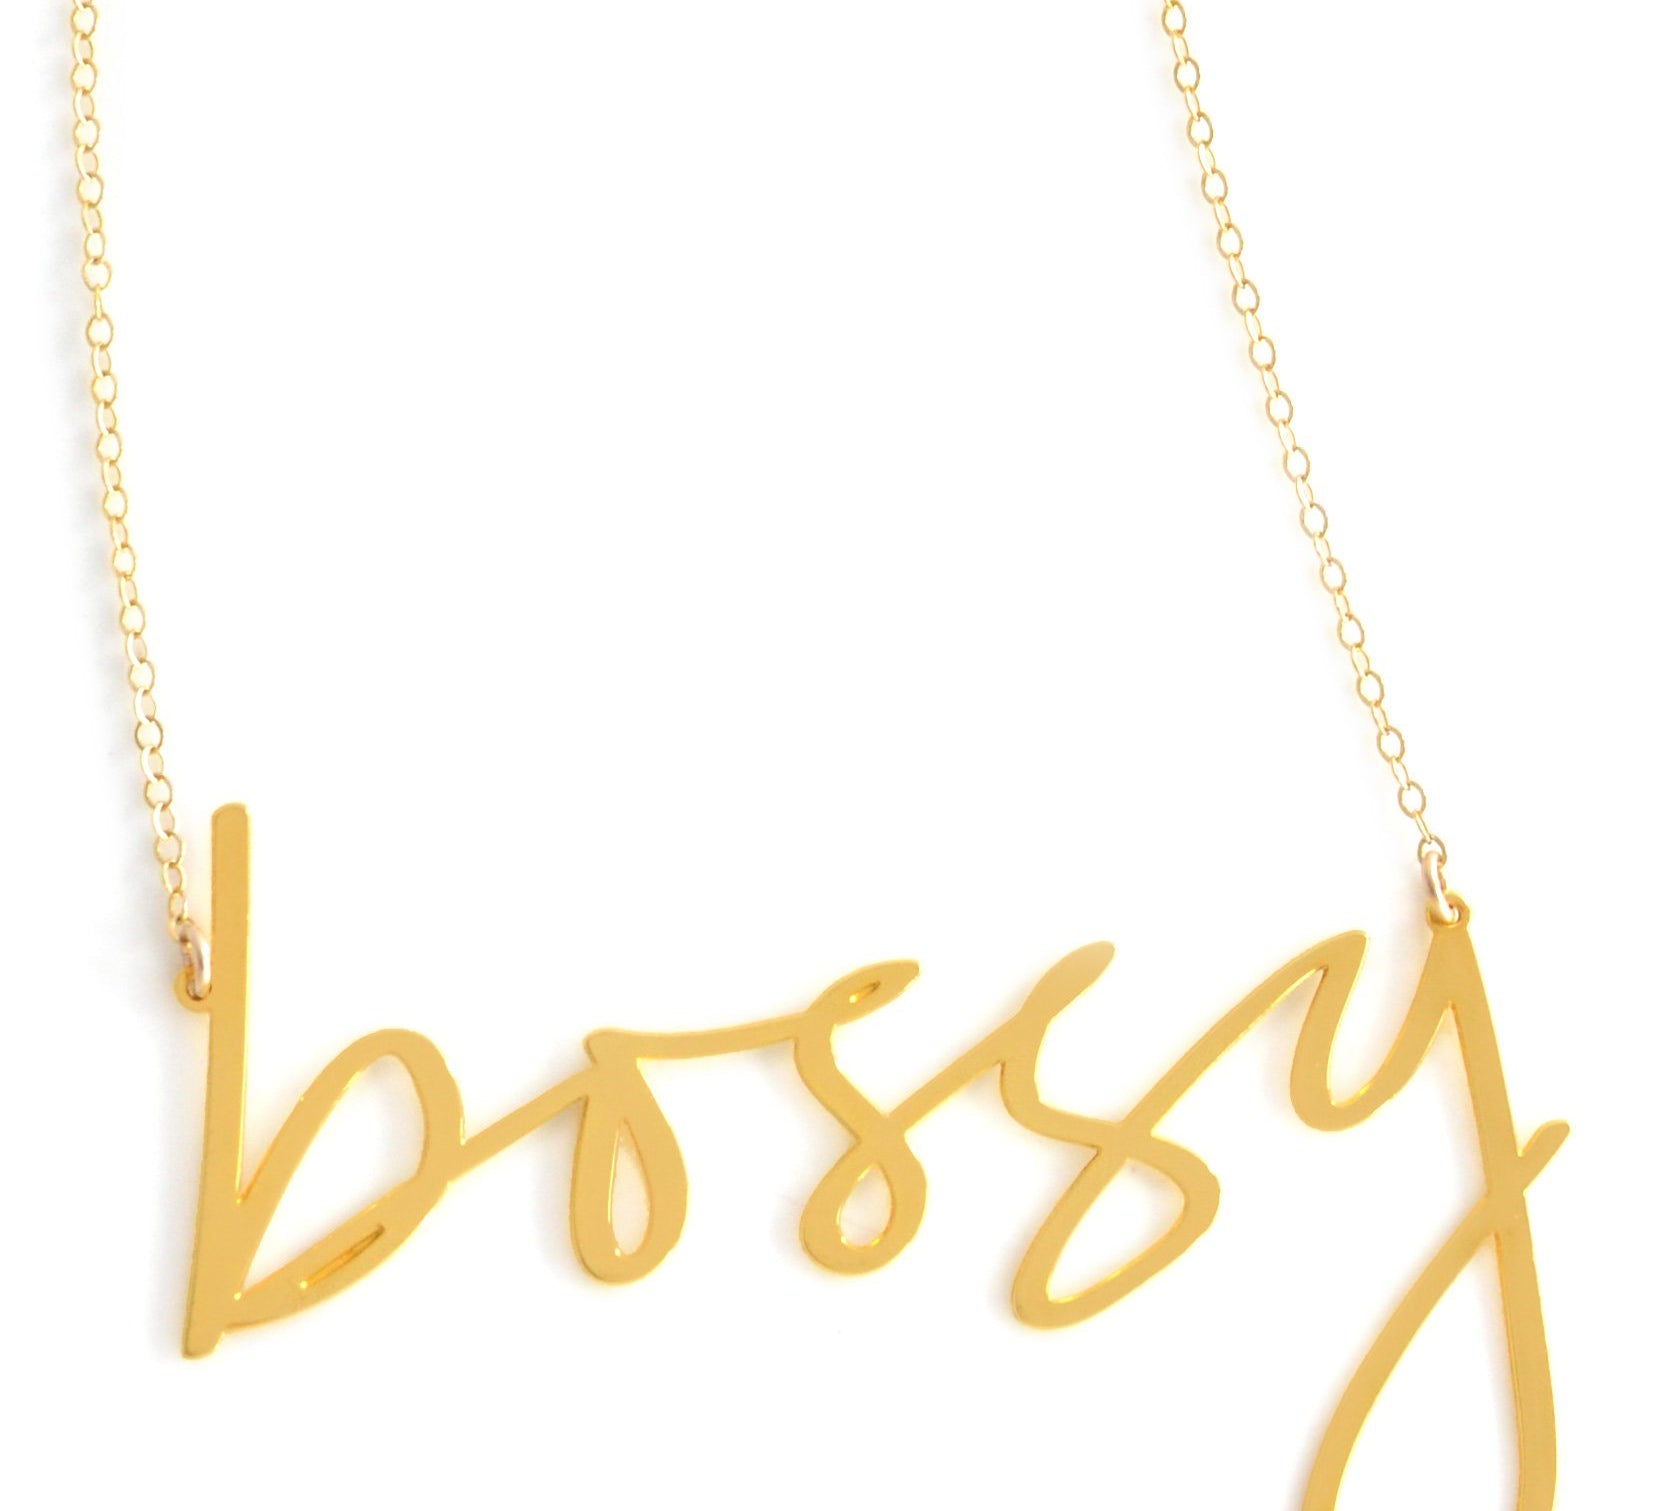 Bossy Necklace - High Quality, Affordable, Hand Written, Empowering, Self Love, Mantra Word Necklace - Available in Gold and Silver - Small and Large Sizes - Made in USA - Brevity Jewelry